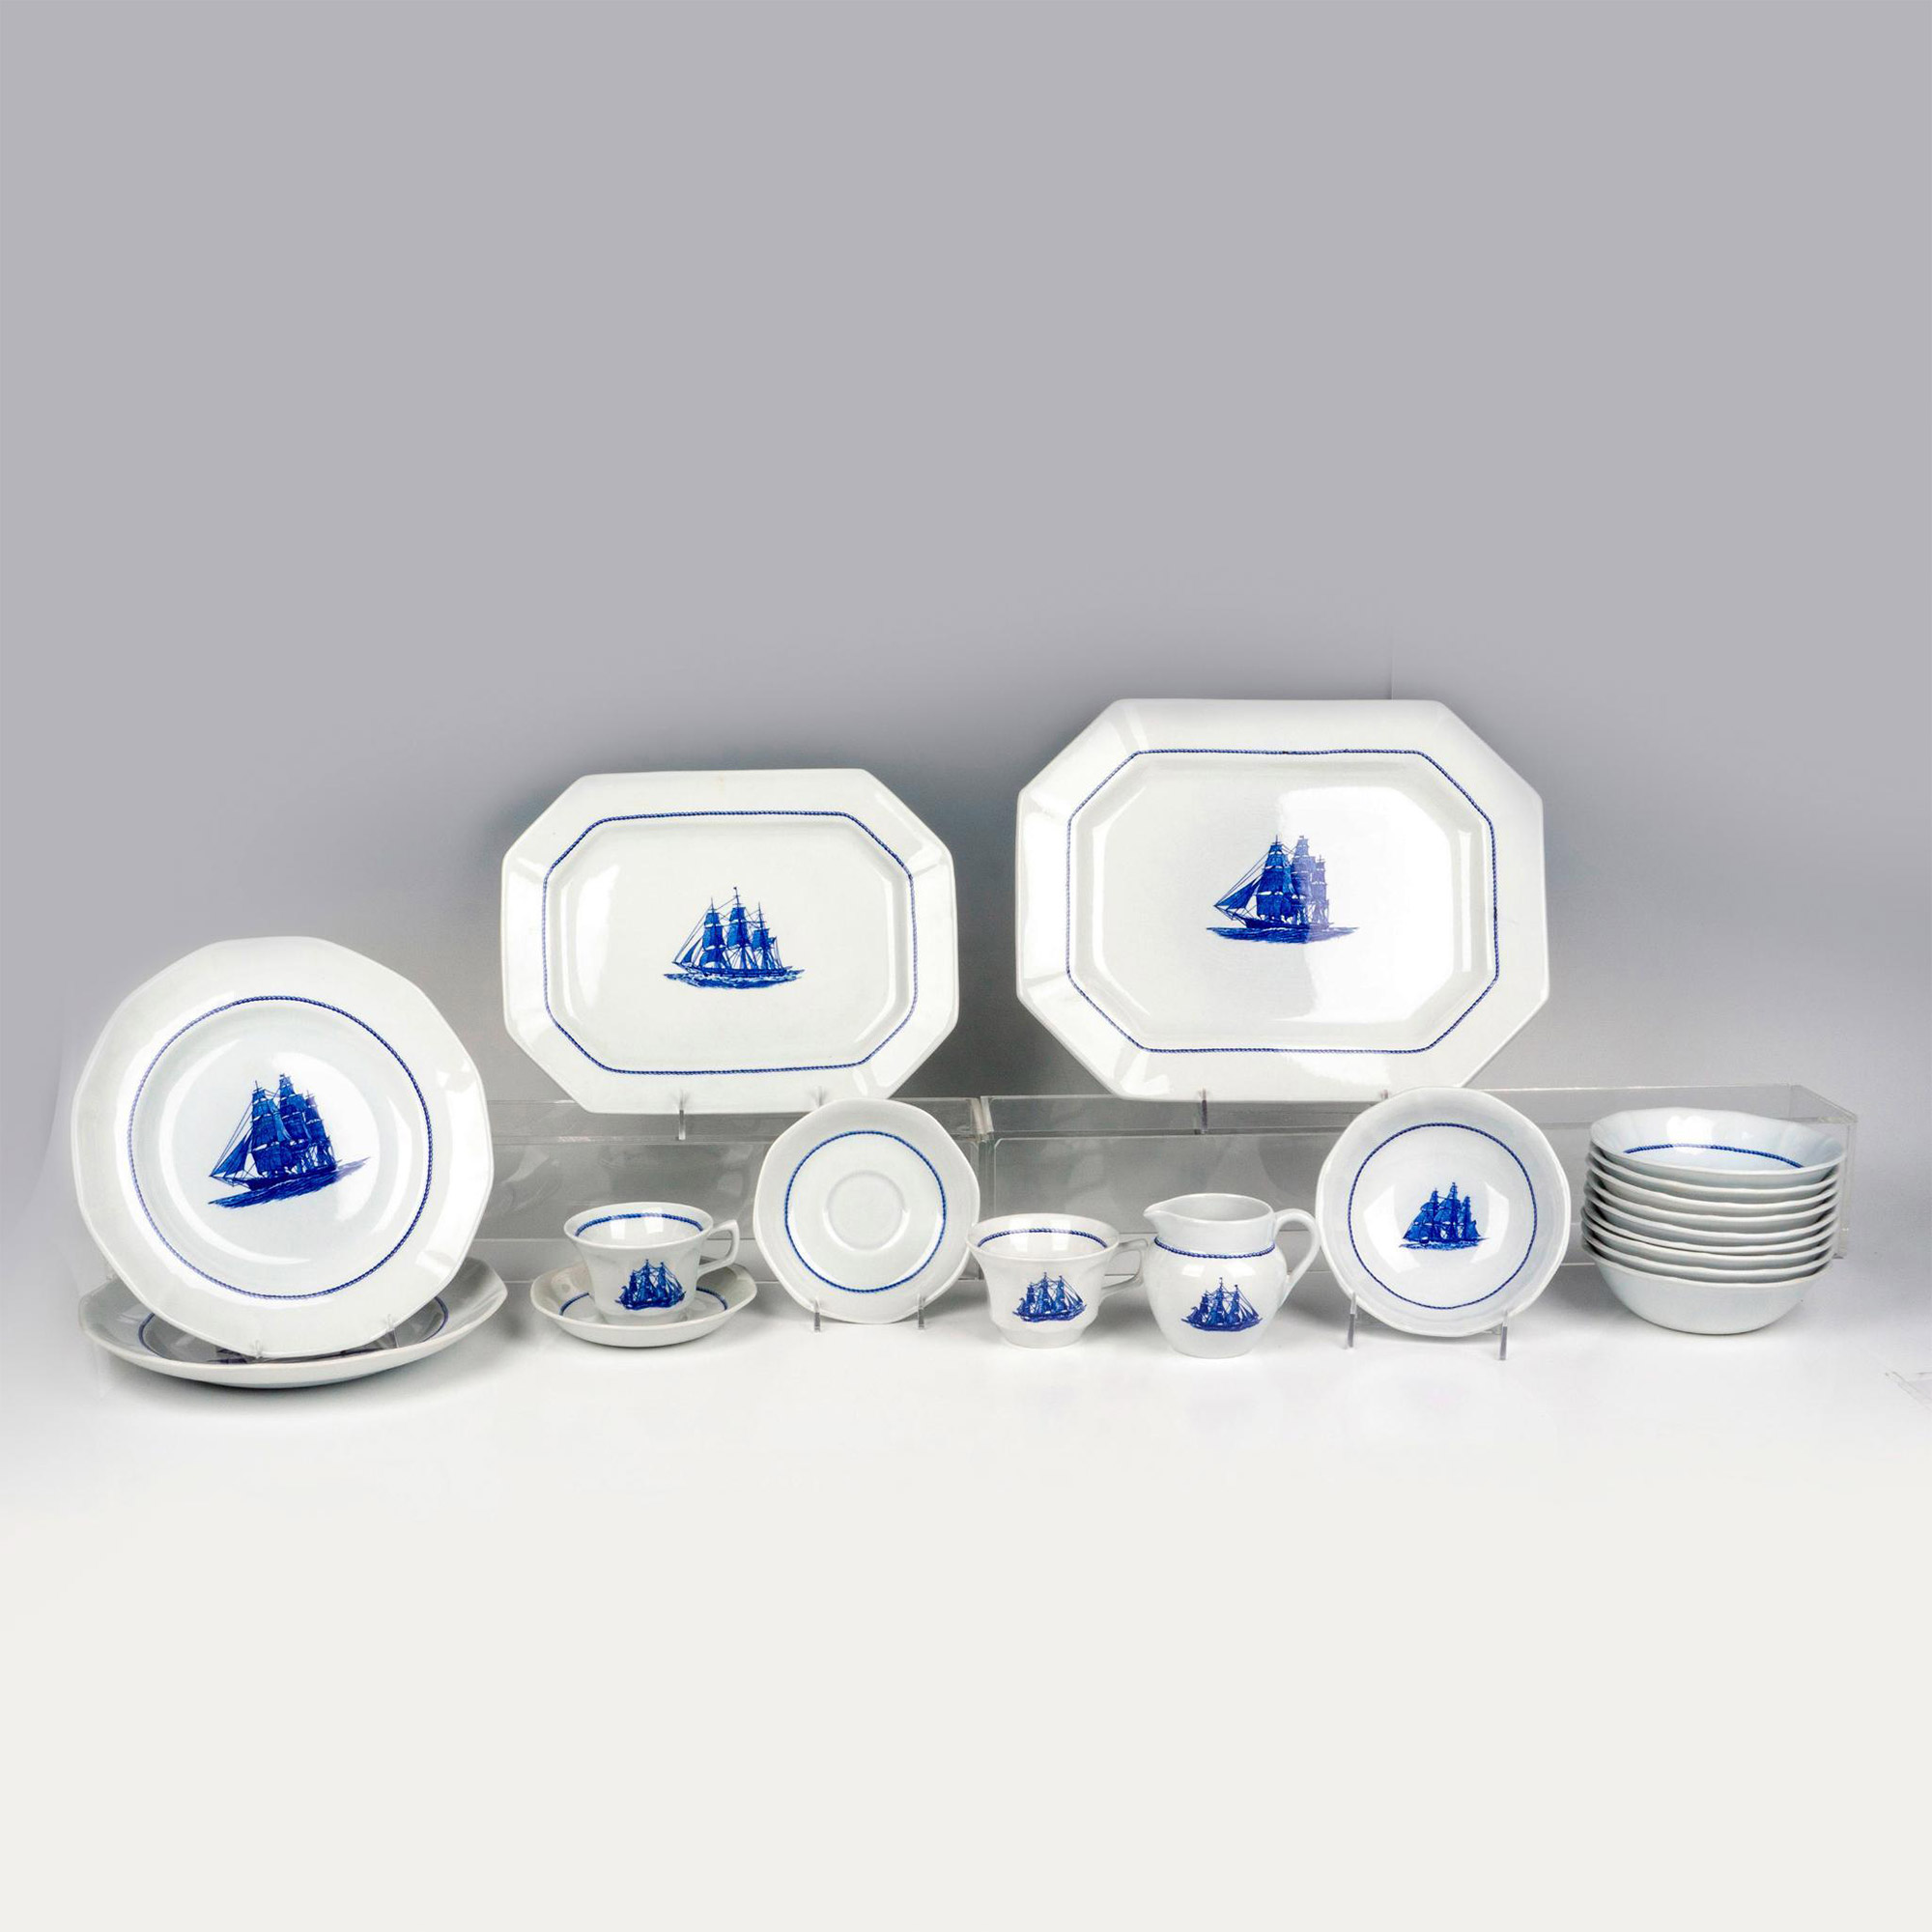 19pc Wedgwood Ceramic American Clipper Table Set